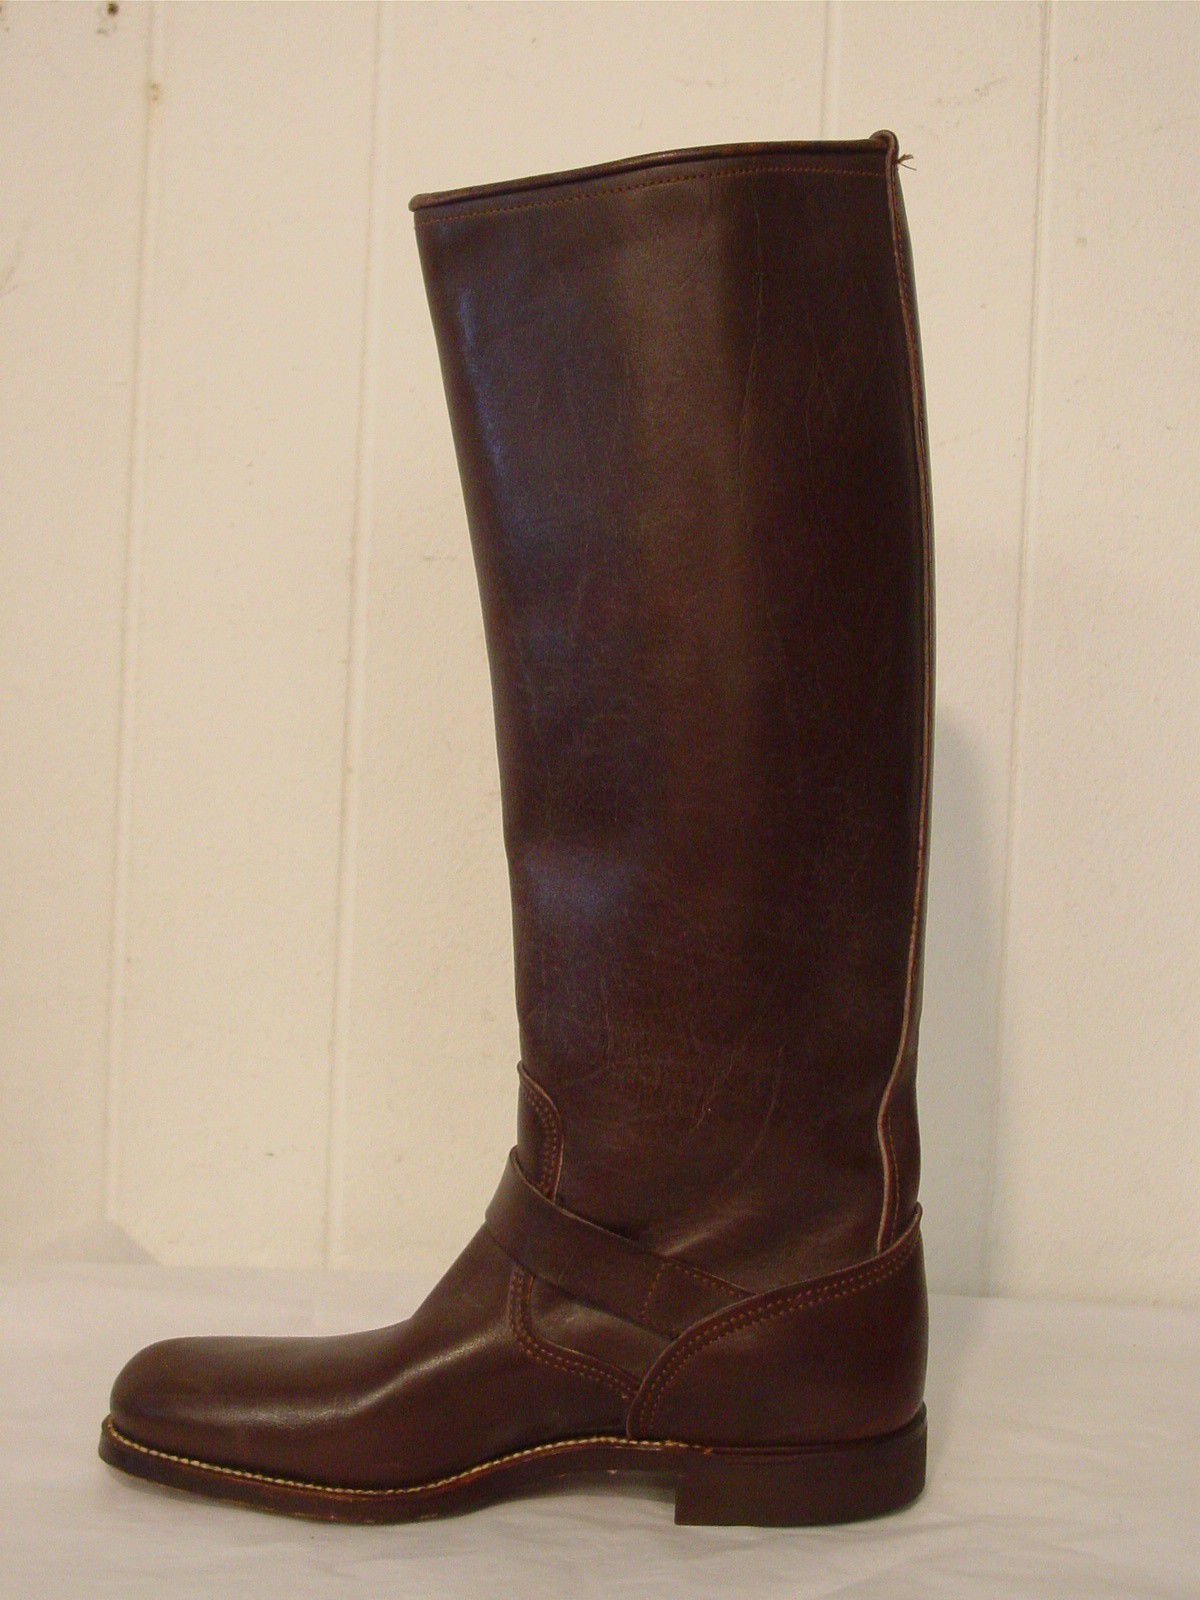 Vintage Engineer Boots: 1940'S CHIPPEWA ENGINEER BOOTS FOR THE LADIES